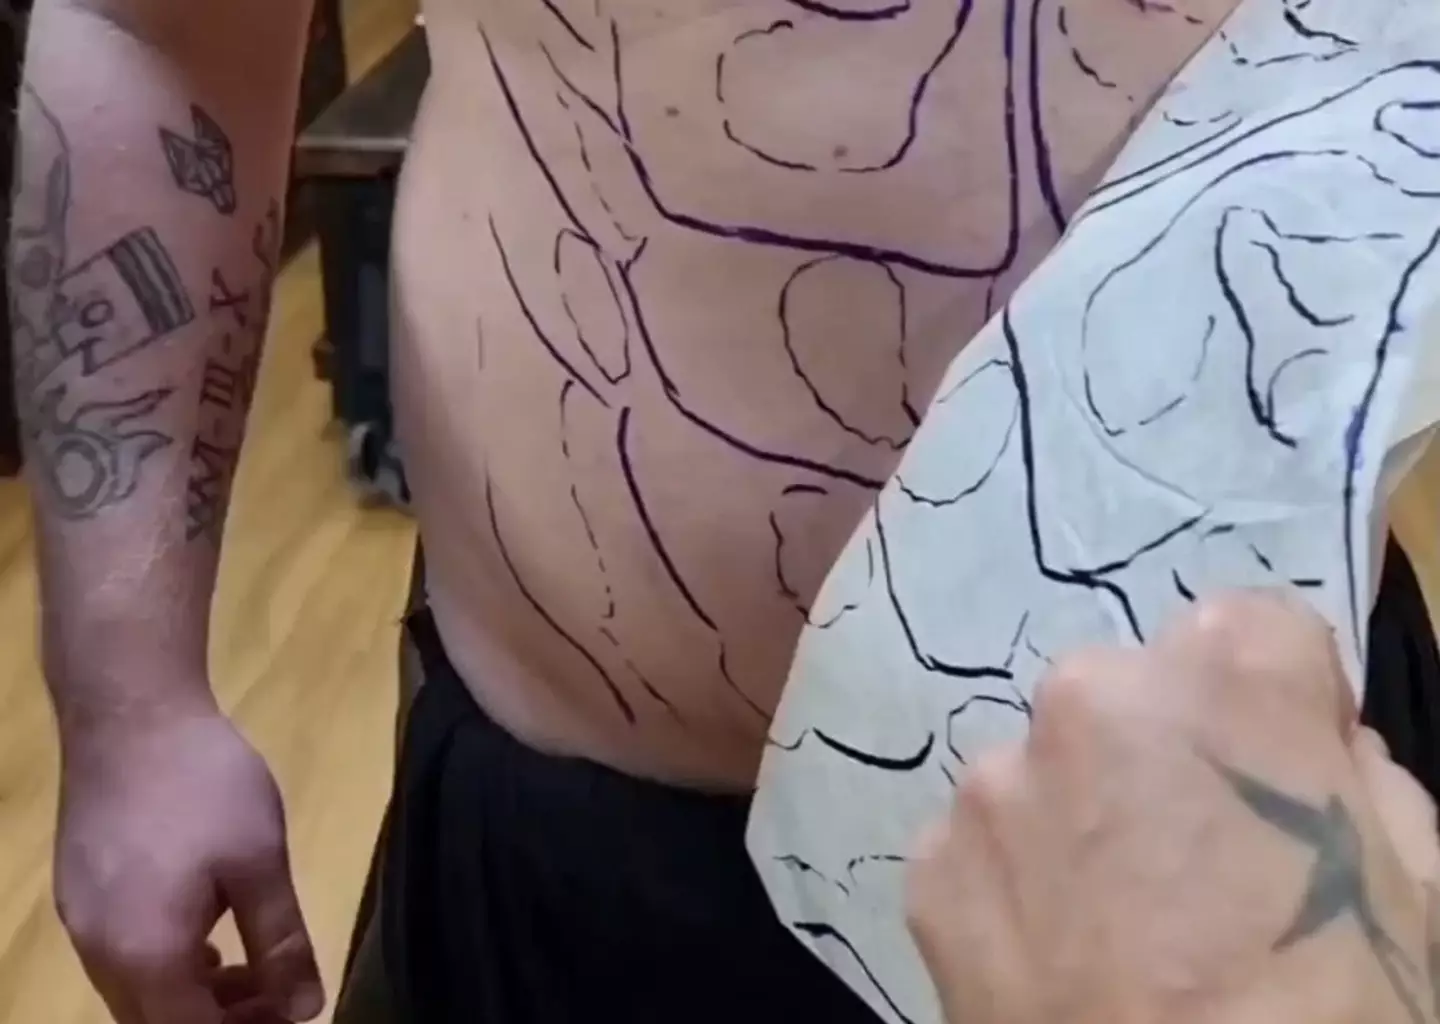 Tattoo artist Dean planned out how he'd give his happy customer a great looking six-pack.